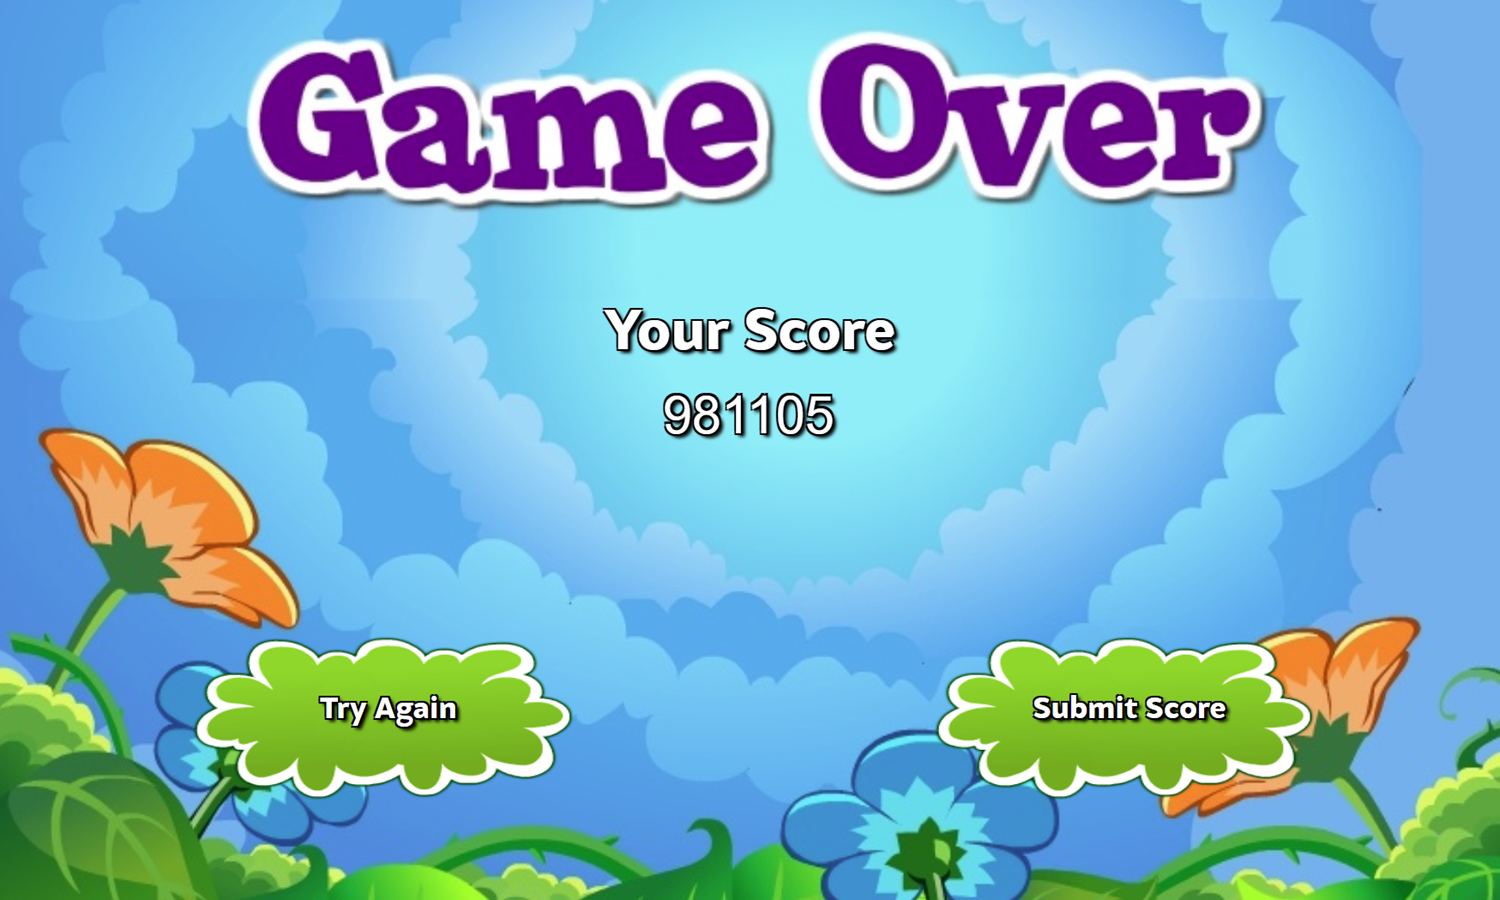 Bug Connect Game Over Screen Screenshot.